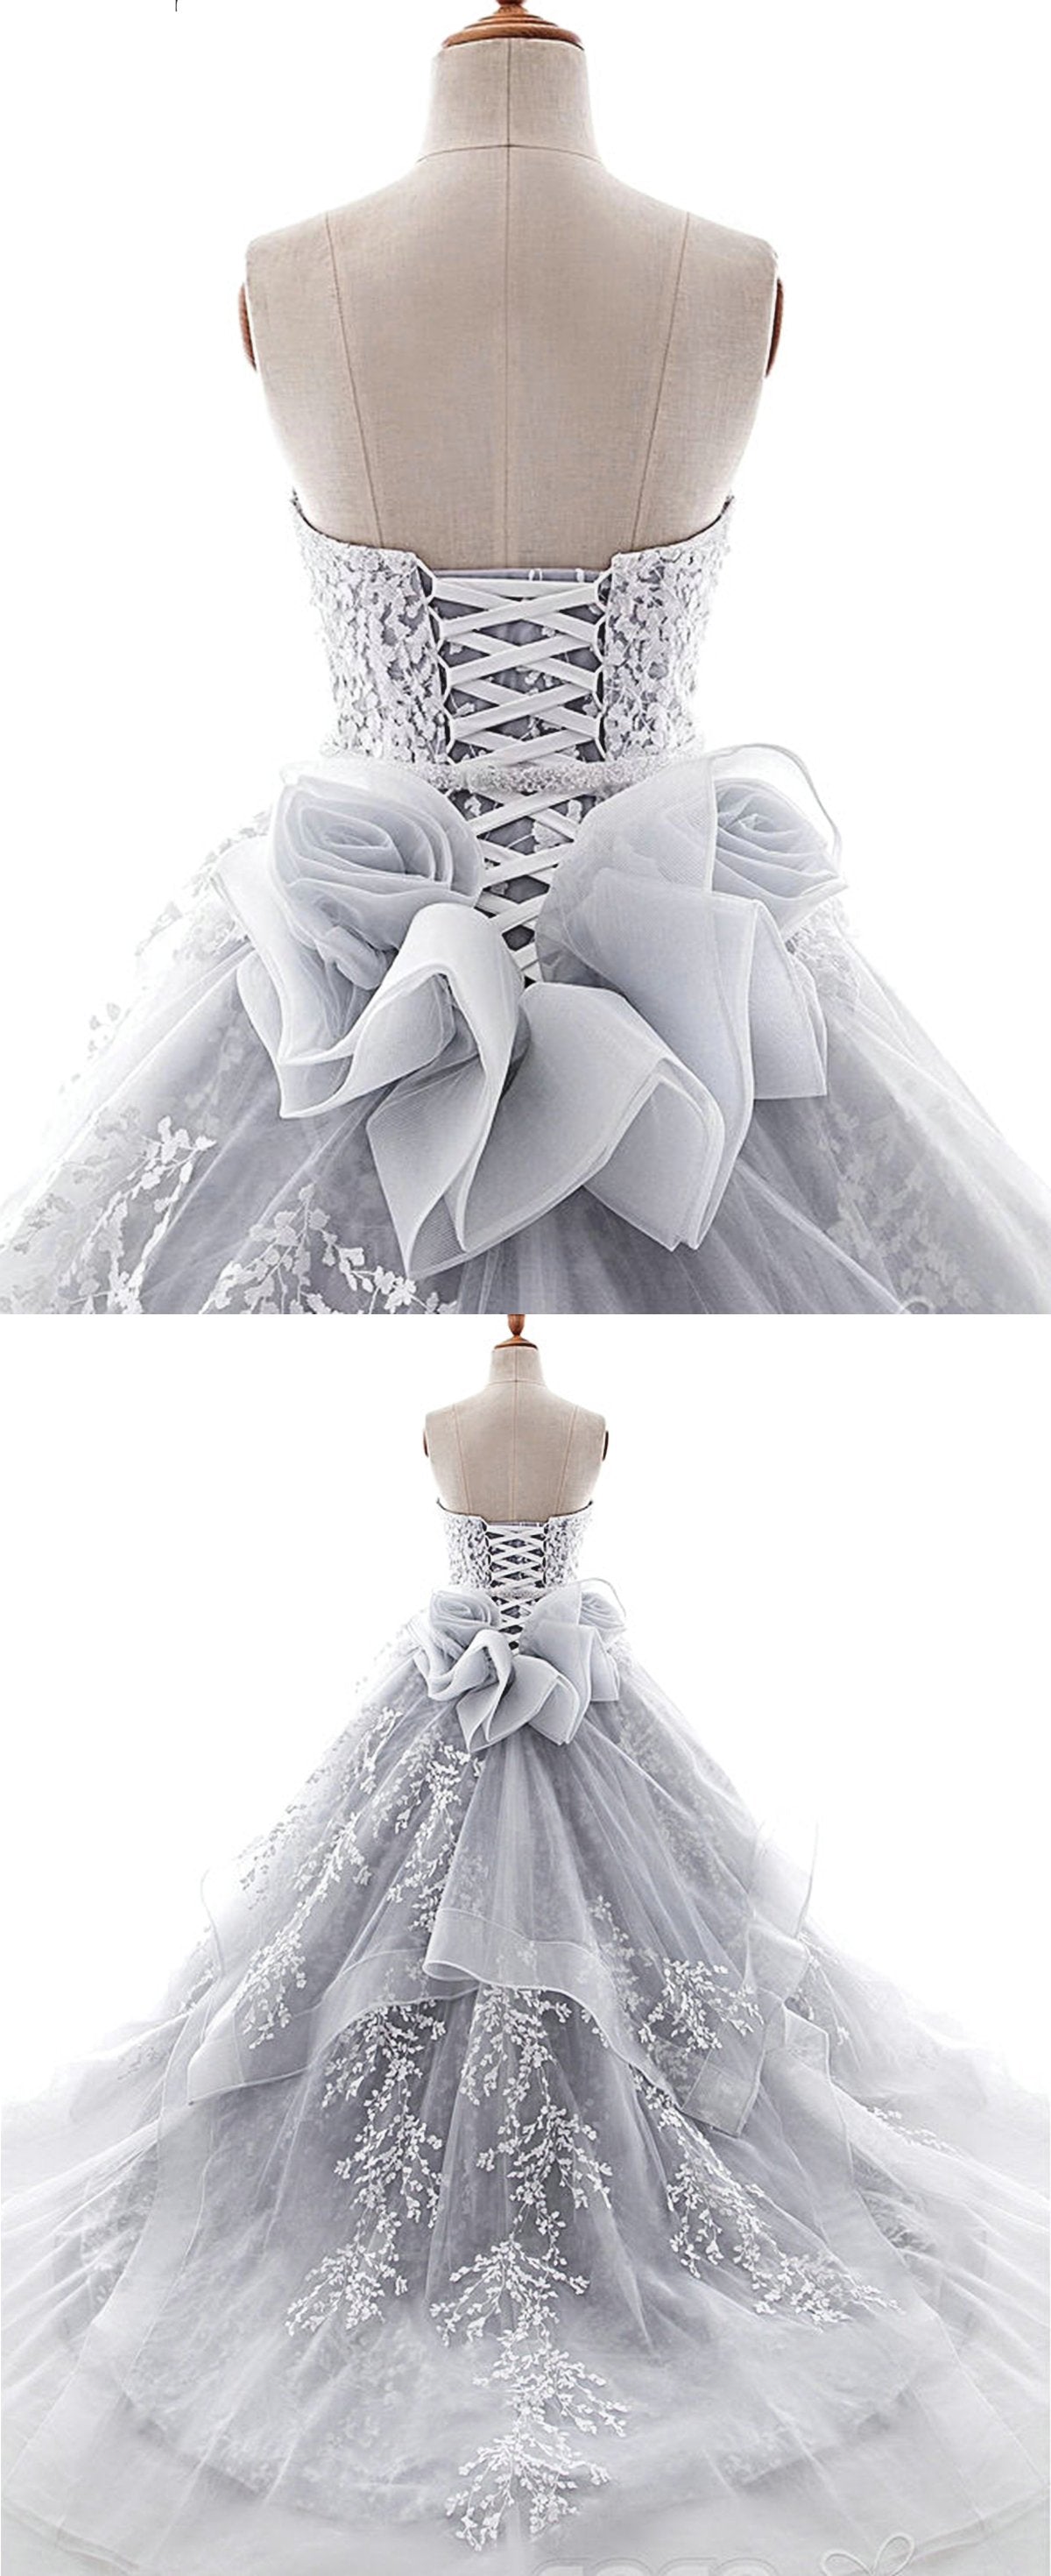 Sweetheart Neck Gray Organza Lace Applique Long Formal Prom Dress, Evening Dress CD16799